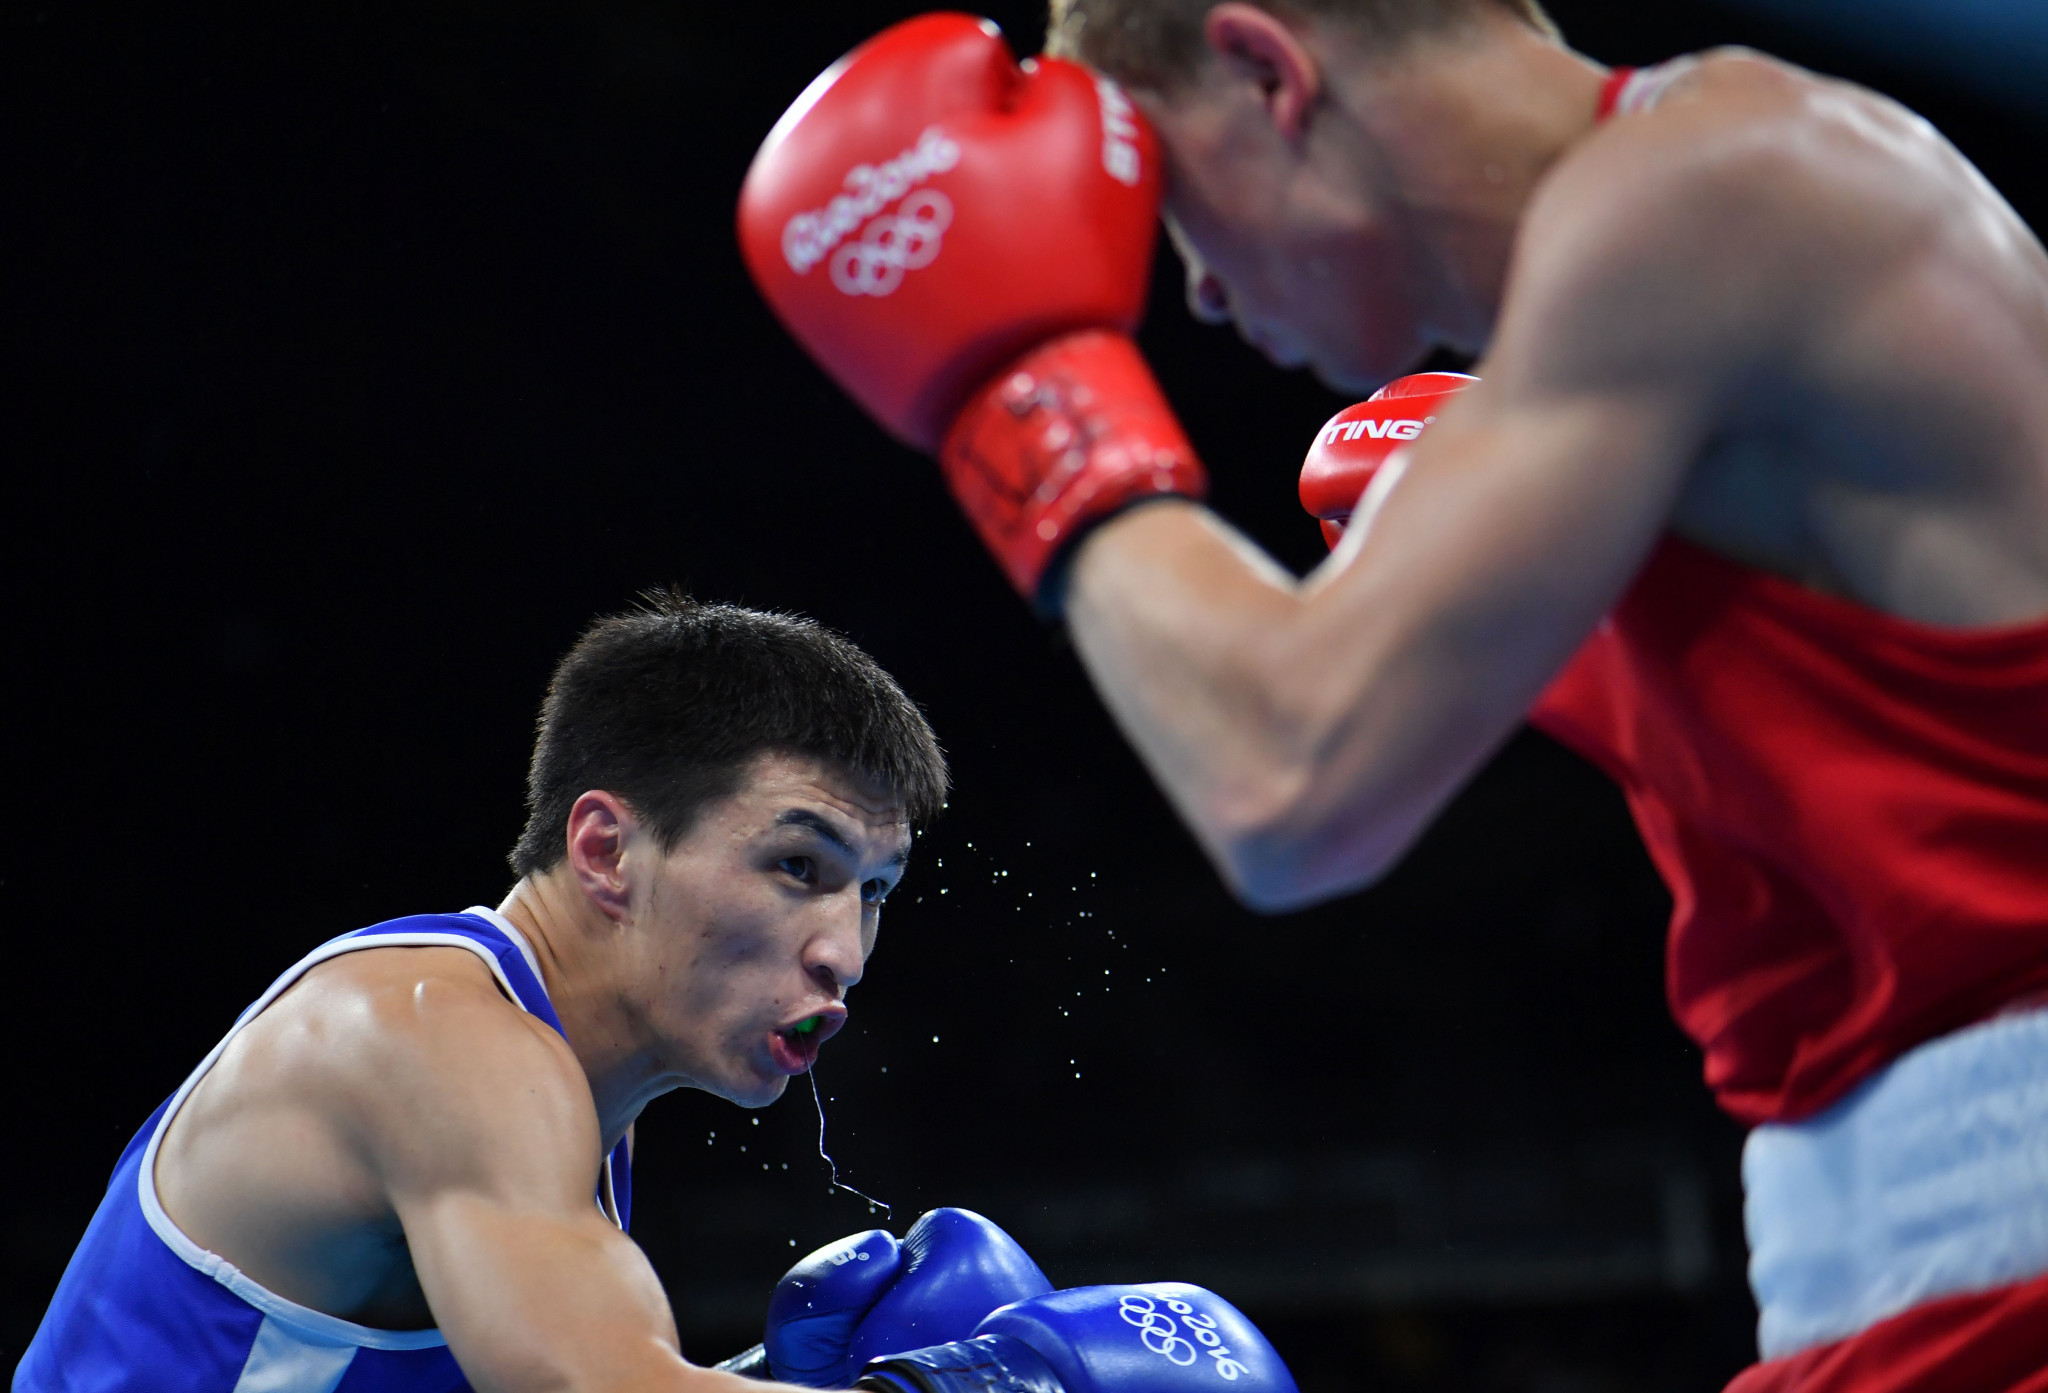 Erkin Adylbek Uulu is one of the Kyrgyzstan athletes at the training camp ©Getty Images